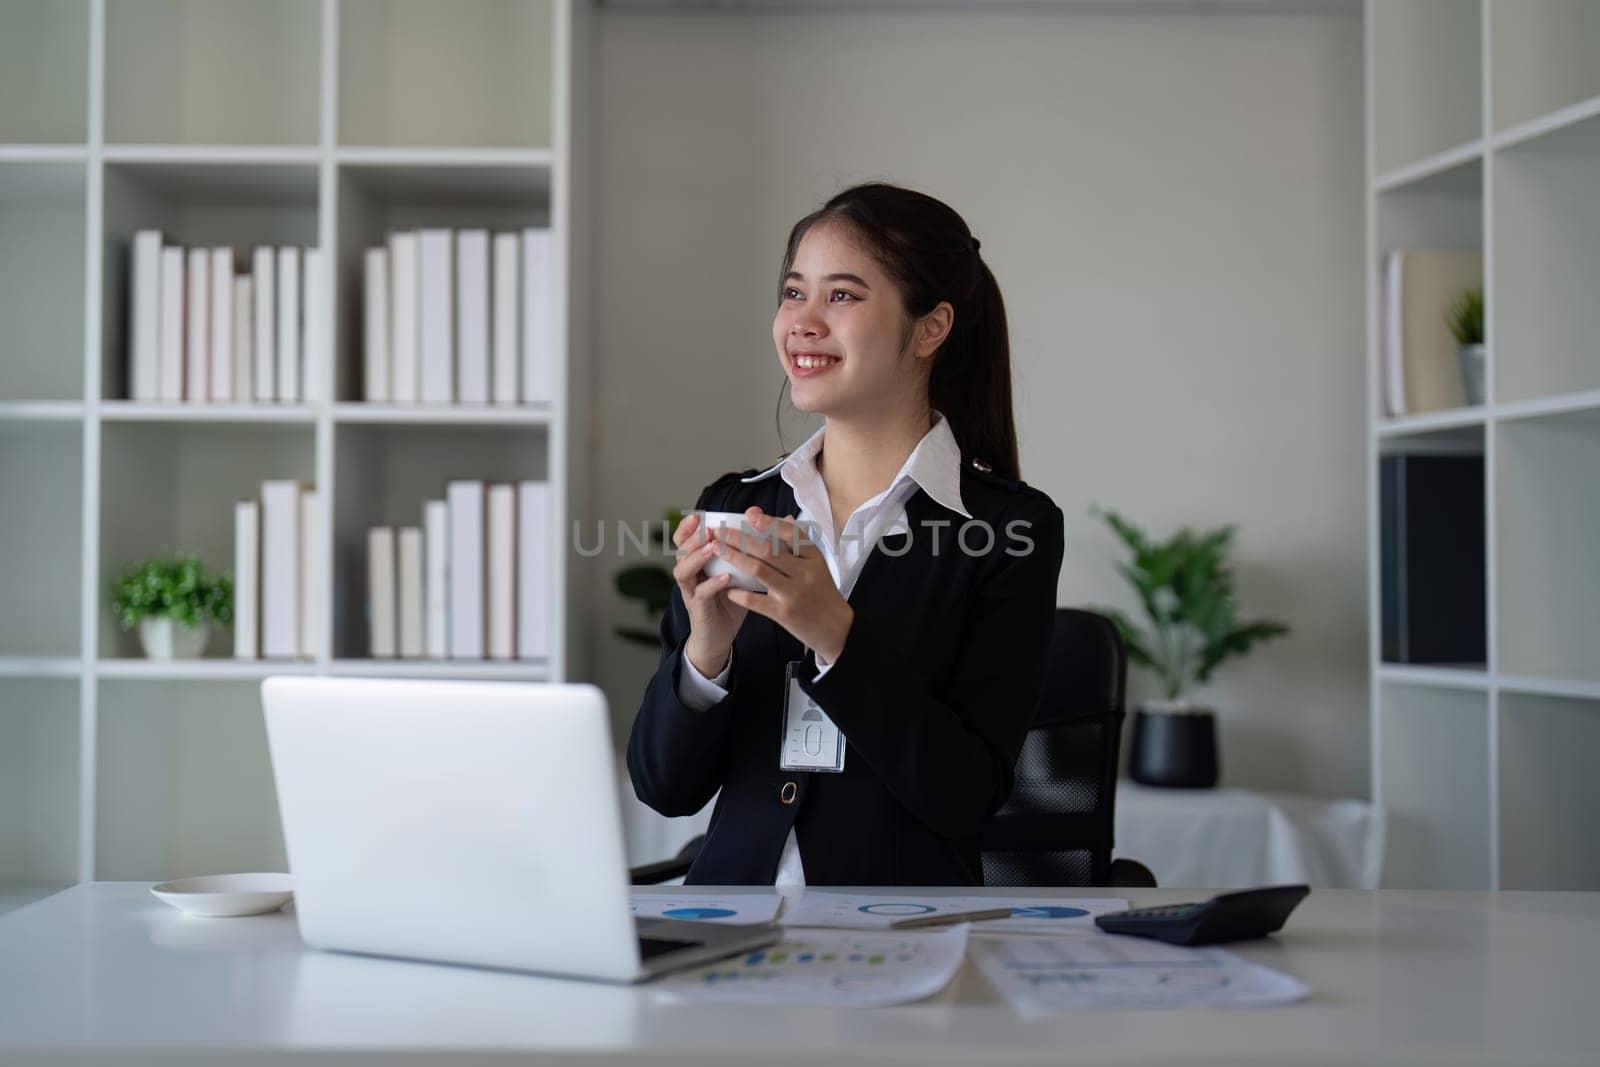 Businesswoman drinking coffee in office. Concept of relaxation, technology, and productivity.